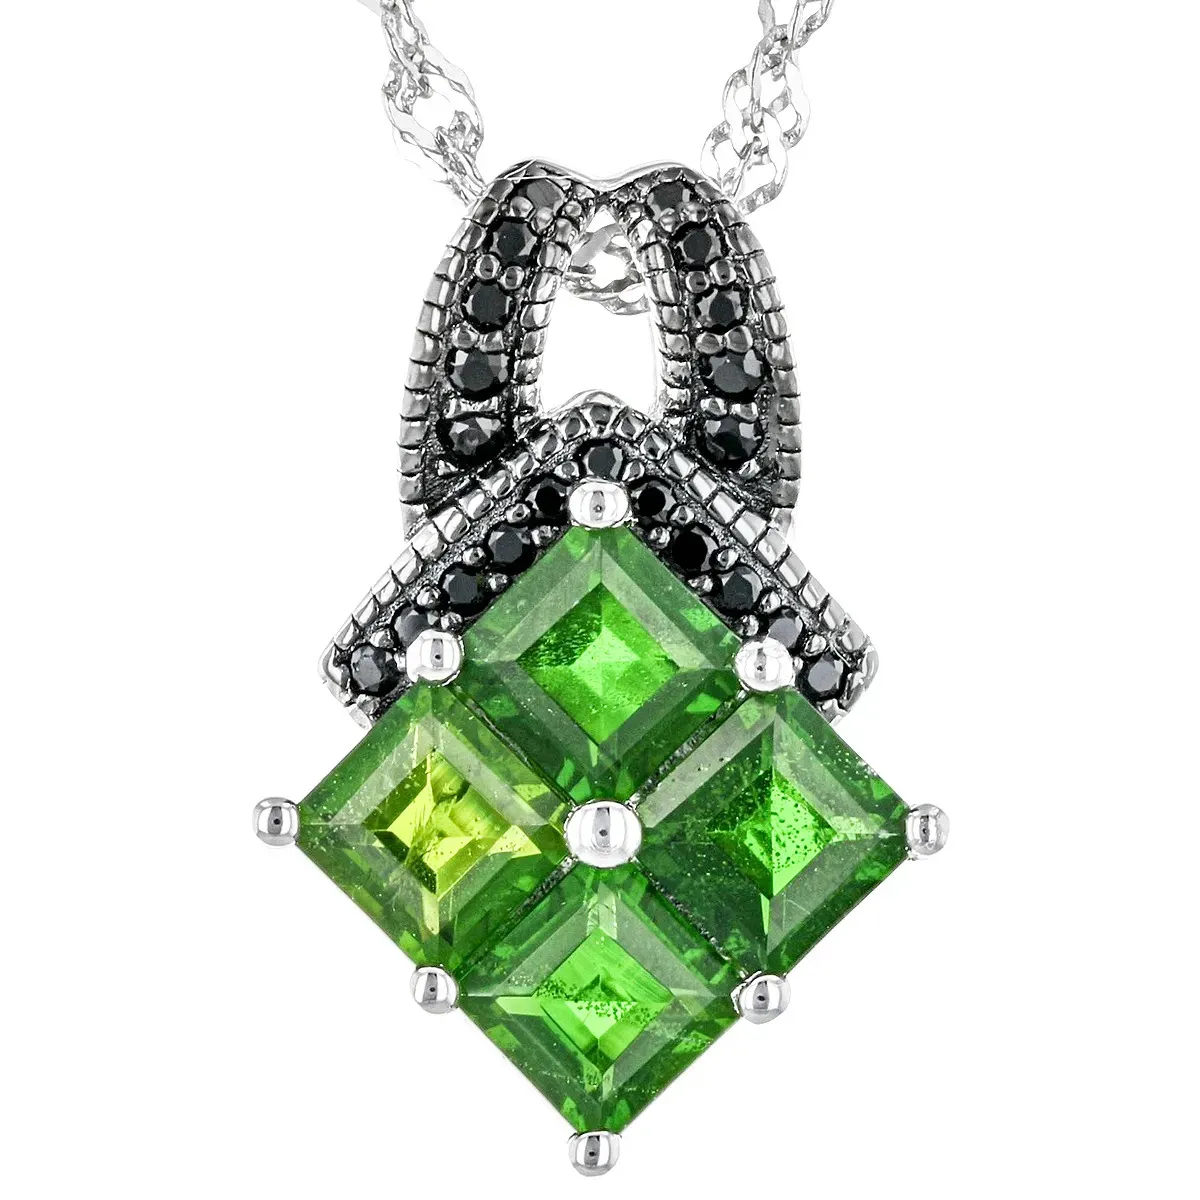 Chrome Diopside Pendant with Chain, Rhodium Over 925 Sterling Silver, A Timeless Expression of Natural Beauty and Radiant